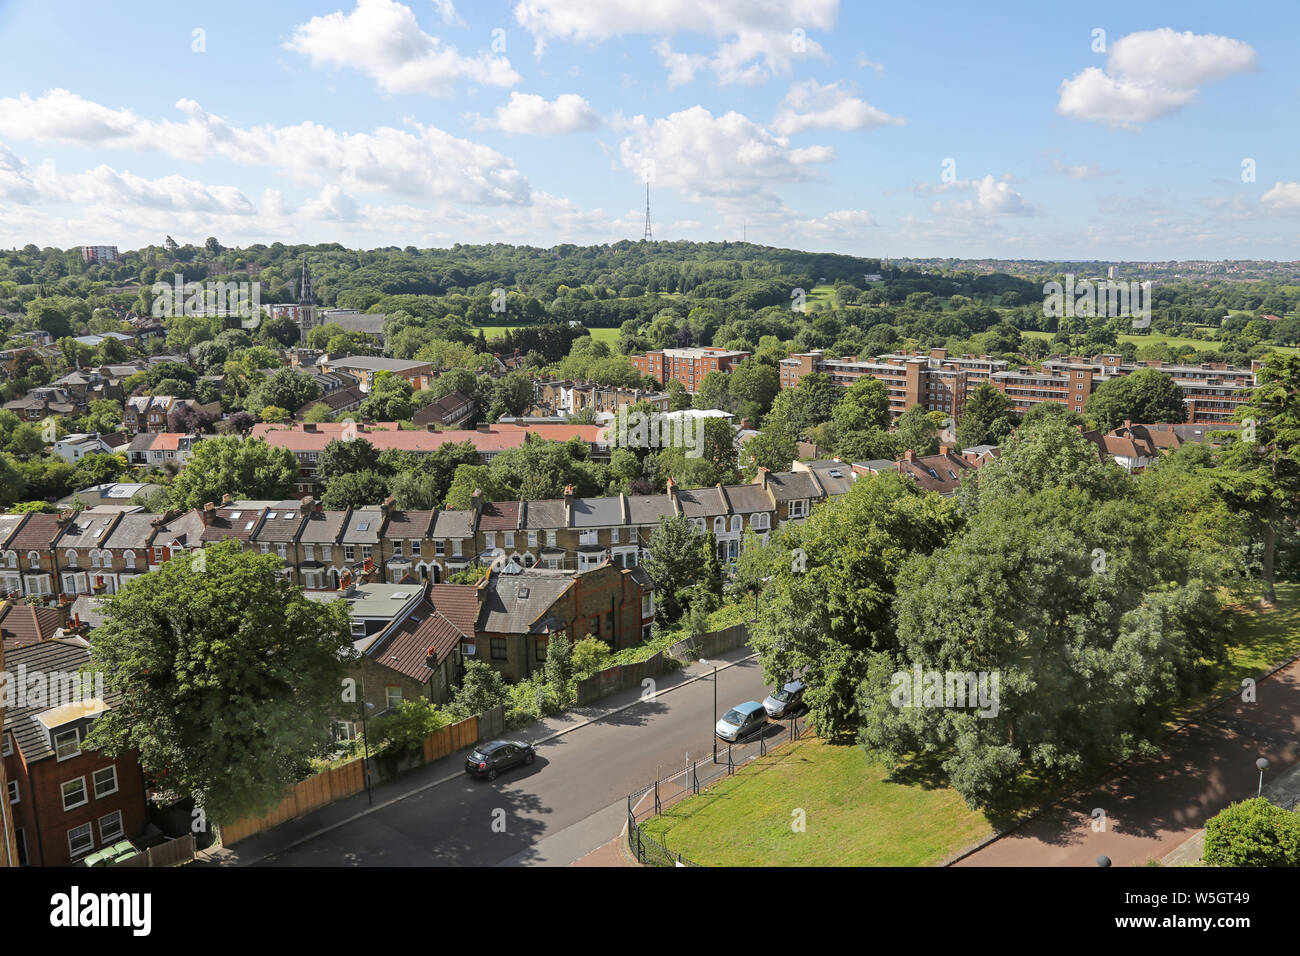 High level view of southeast London - looking south towards Dulwich golf course, upper Sydenham and Crystal Palace. Shows many trees and green spaces. Stock Photo